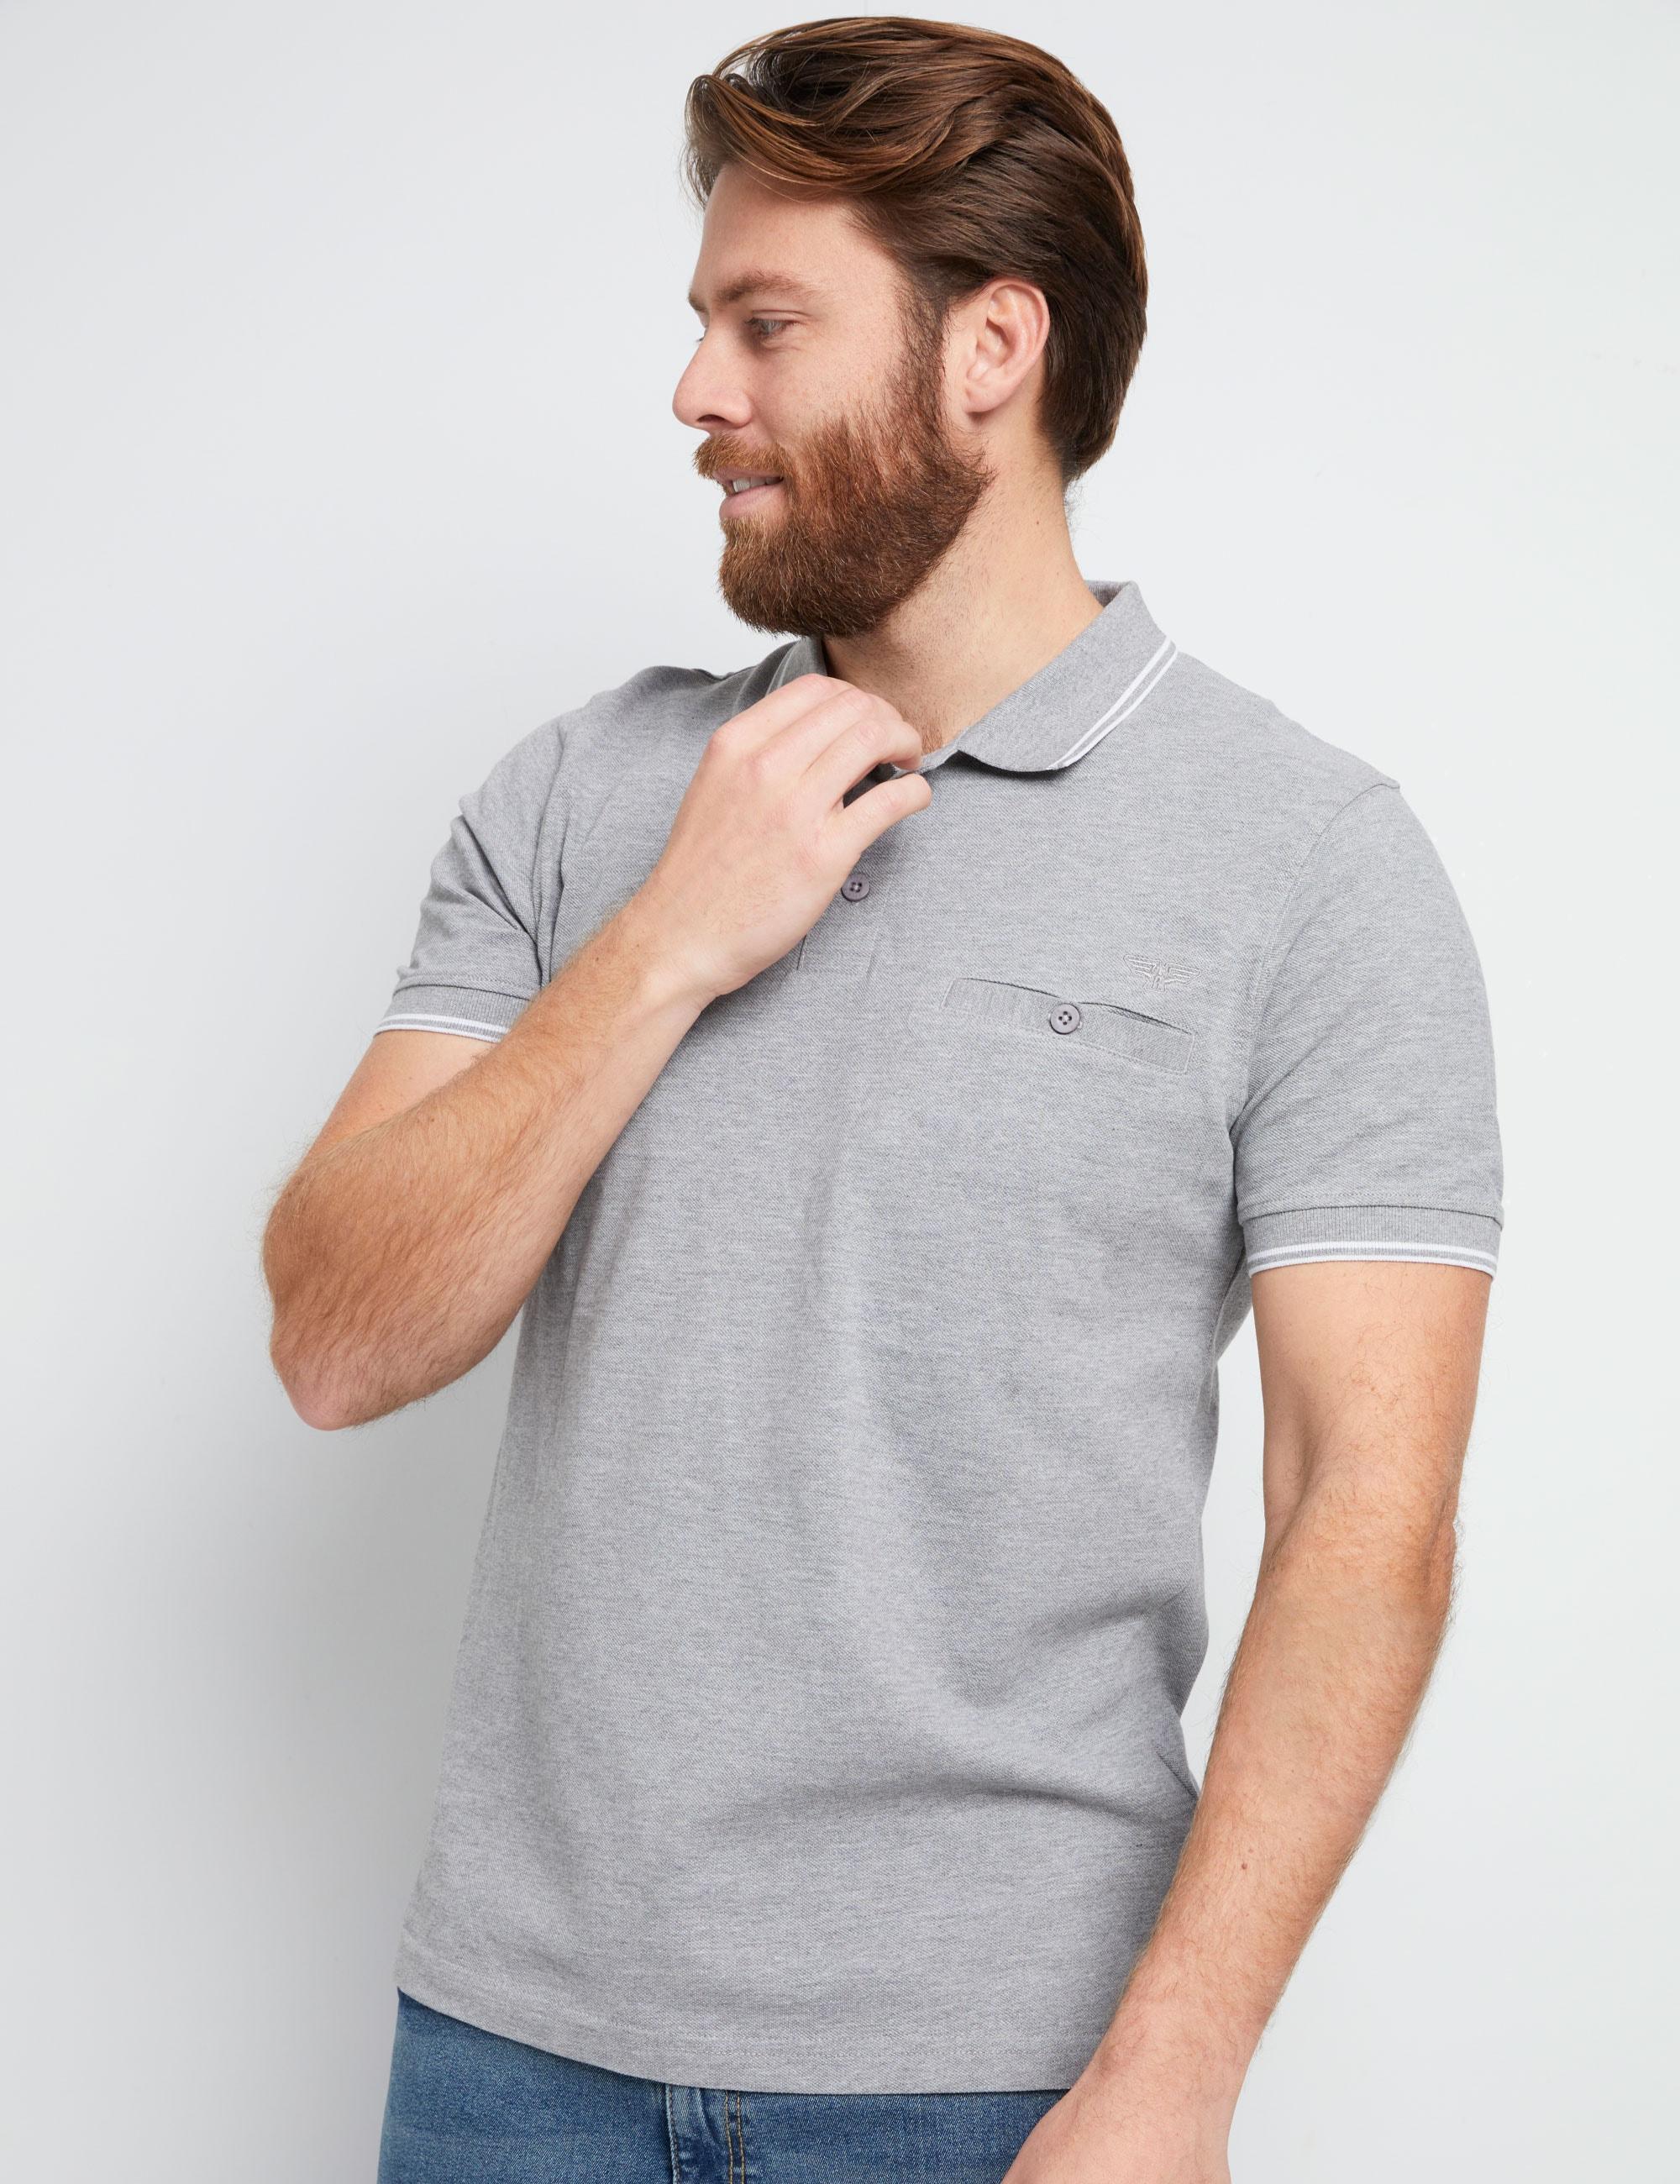 RIVERS - Mens All Season Tops - Grey Polo Shirt / Tshirt - Cotton - Smart Casual - Marle - Fitted - Short Sleeve - Regular - Office Fashion Work Wear